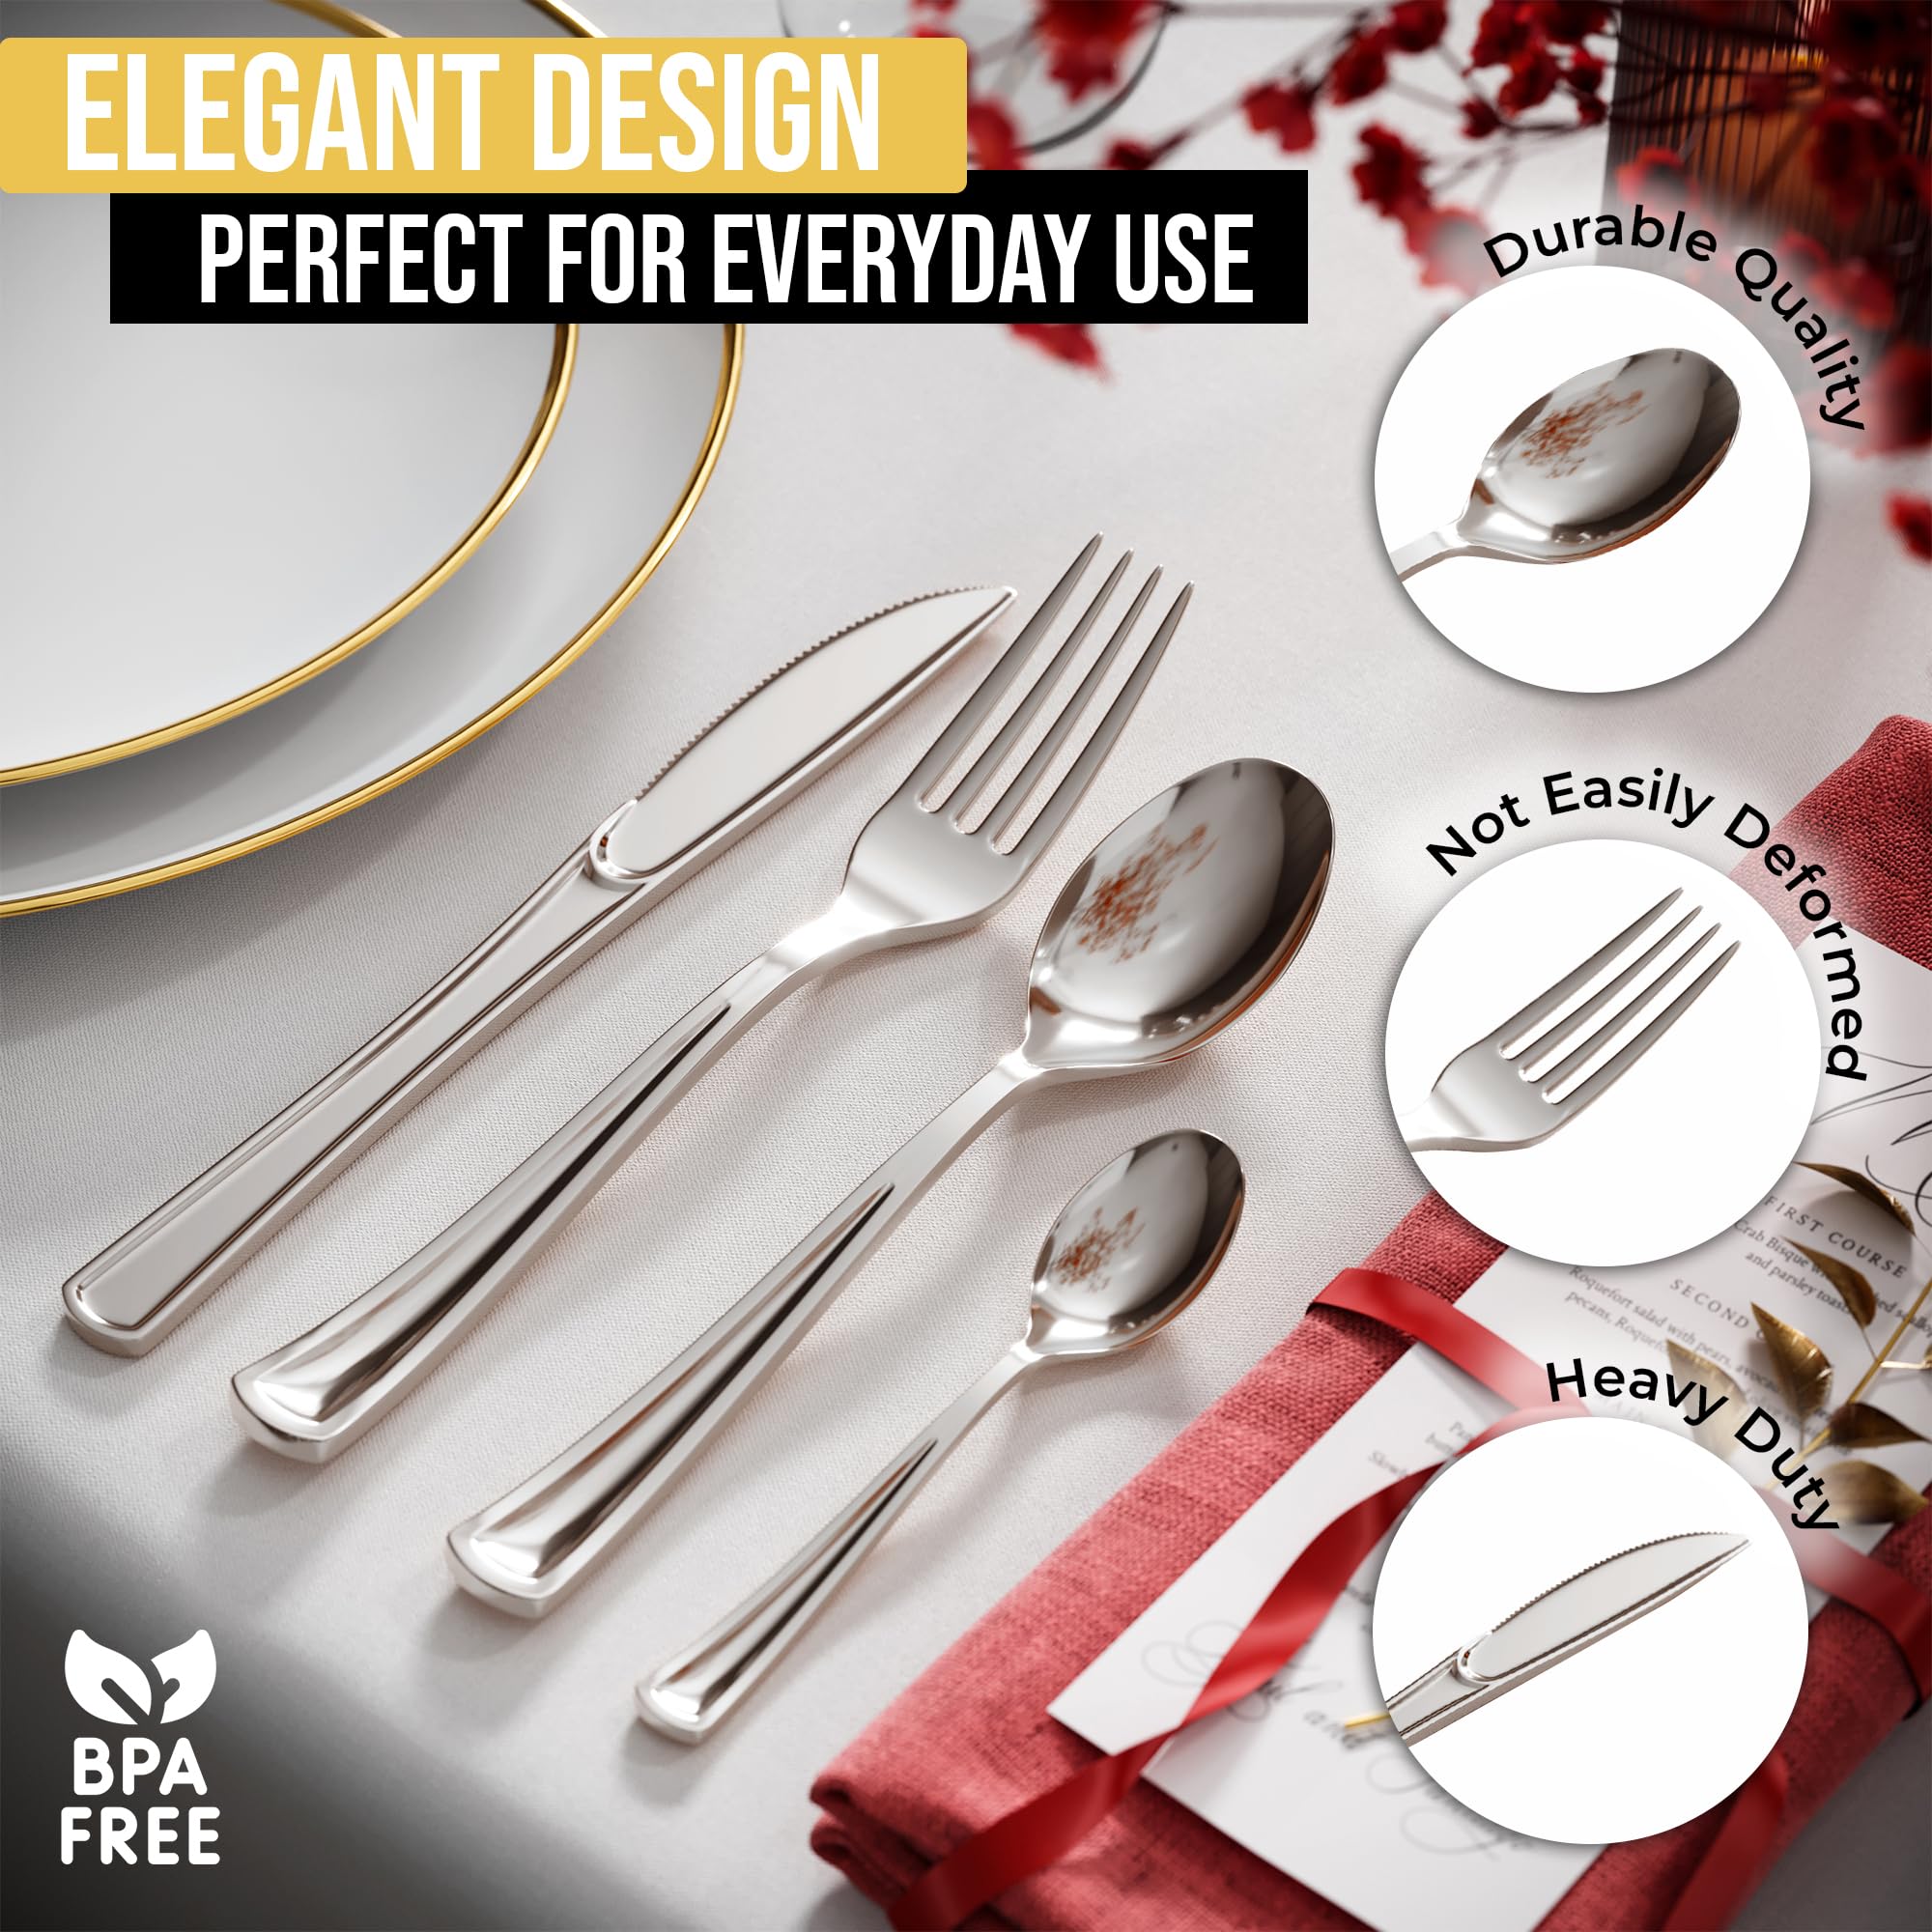 Exquisite Classic Silver Plastic Forks | 20 Count